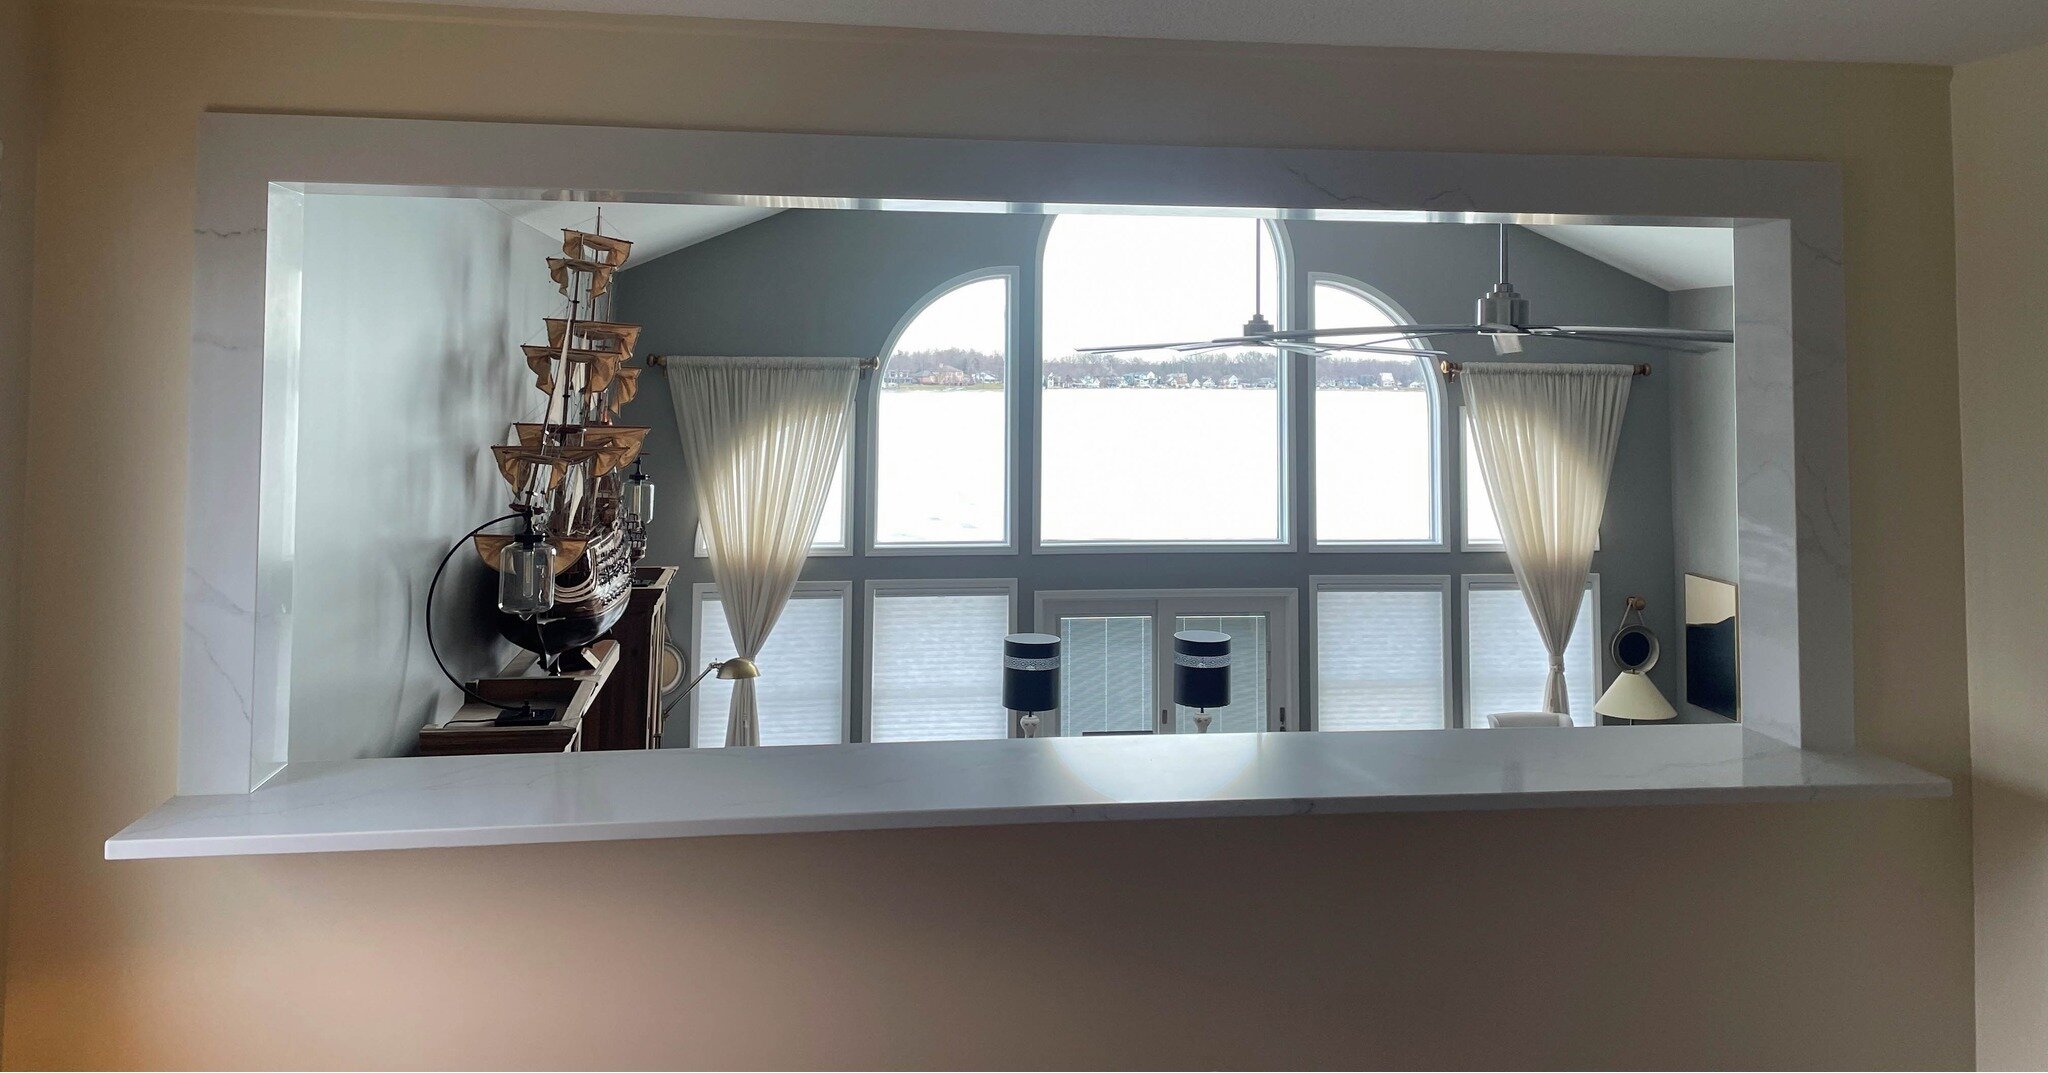 This job started as a simple sill and, thanks to the creative eye of our templater Jon, turned into a decorative quartz-wrapped pass-through creating the perfect frame for a lake view.

Material: Fantastico by @montsurfaces 

#quartzcountertops #quar